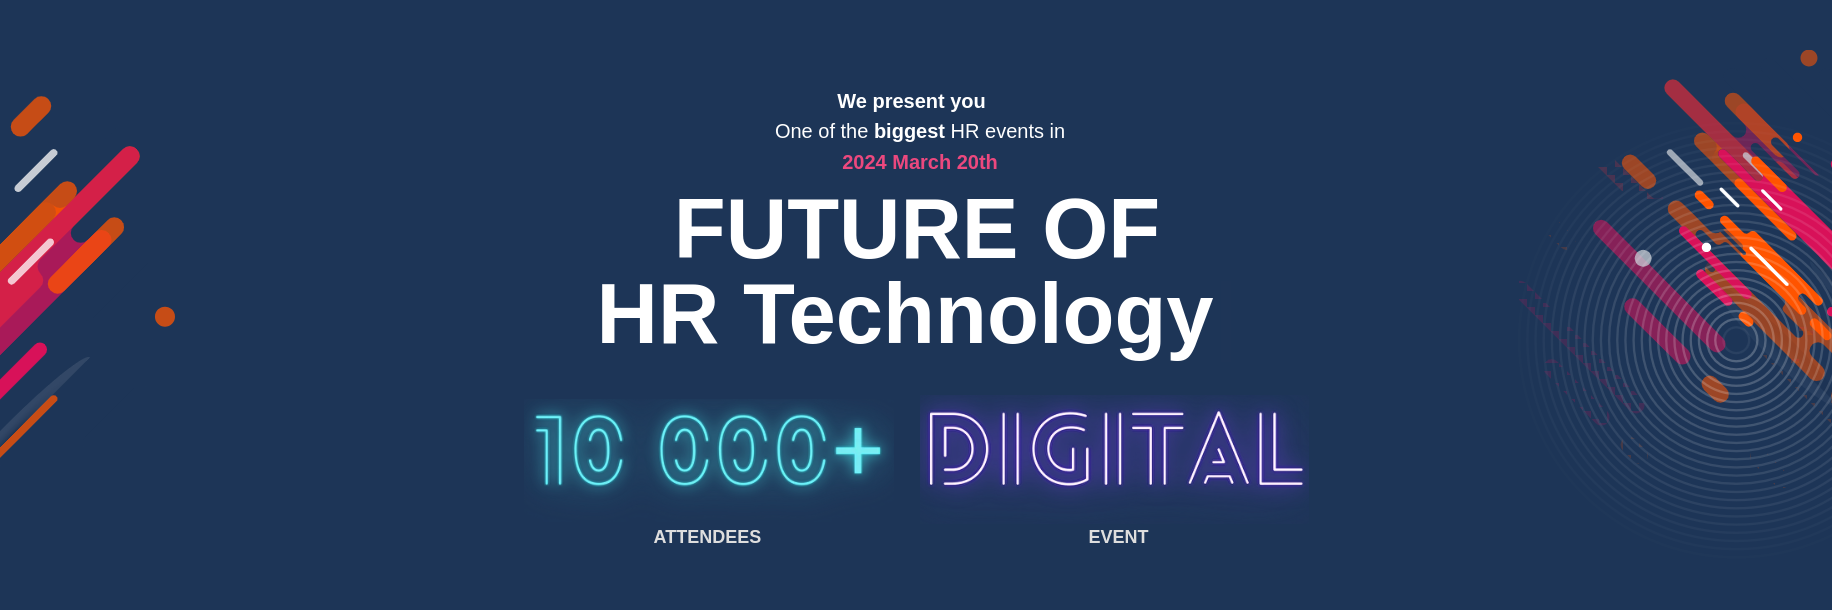 HrTech Events of the month - March 2024